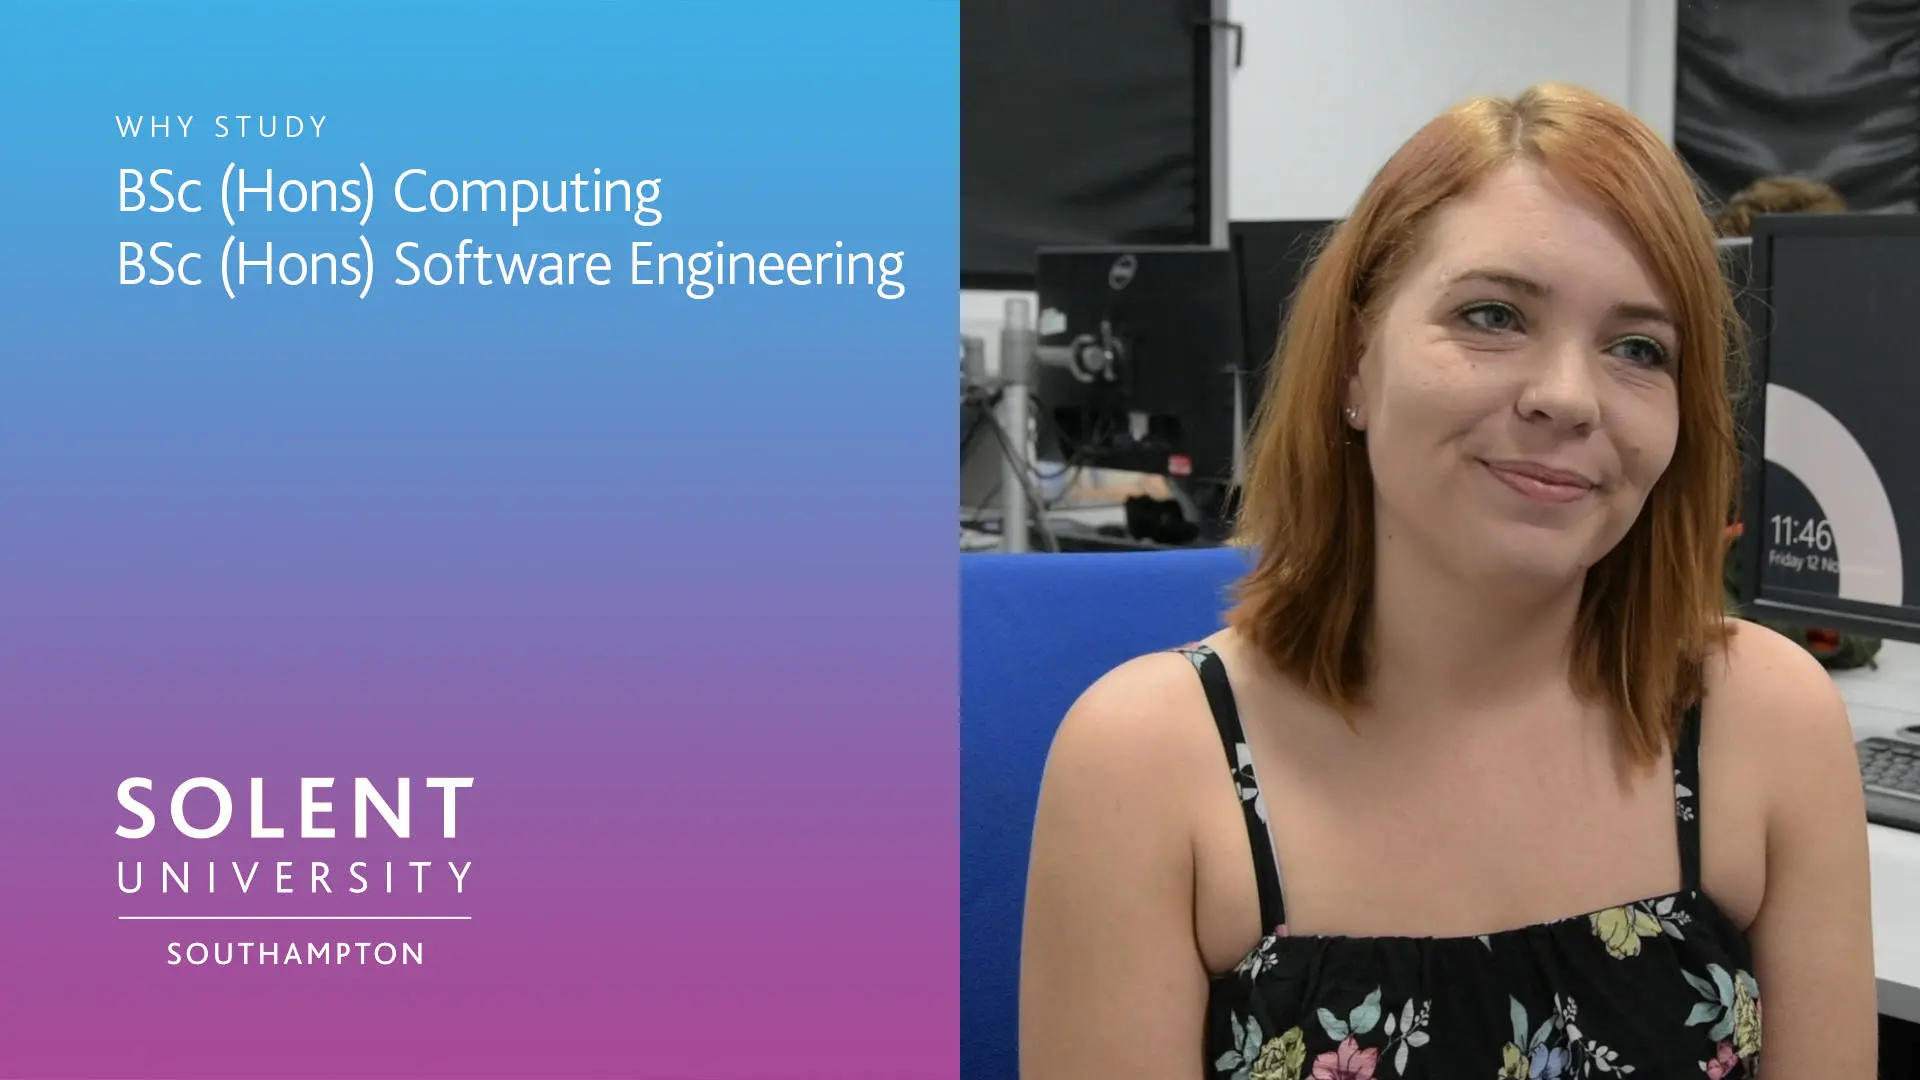 On the left of the screen is a blue to purple gradient (portrait) with white copy over the top which reads 'Why study BSc (Hons) Computing or BSc (Hons) Software Engineering' and the Solent University, Southampton logo bottom left. To the right is a photo of student, who is looking off camera and smiling.